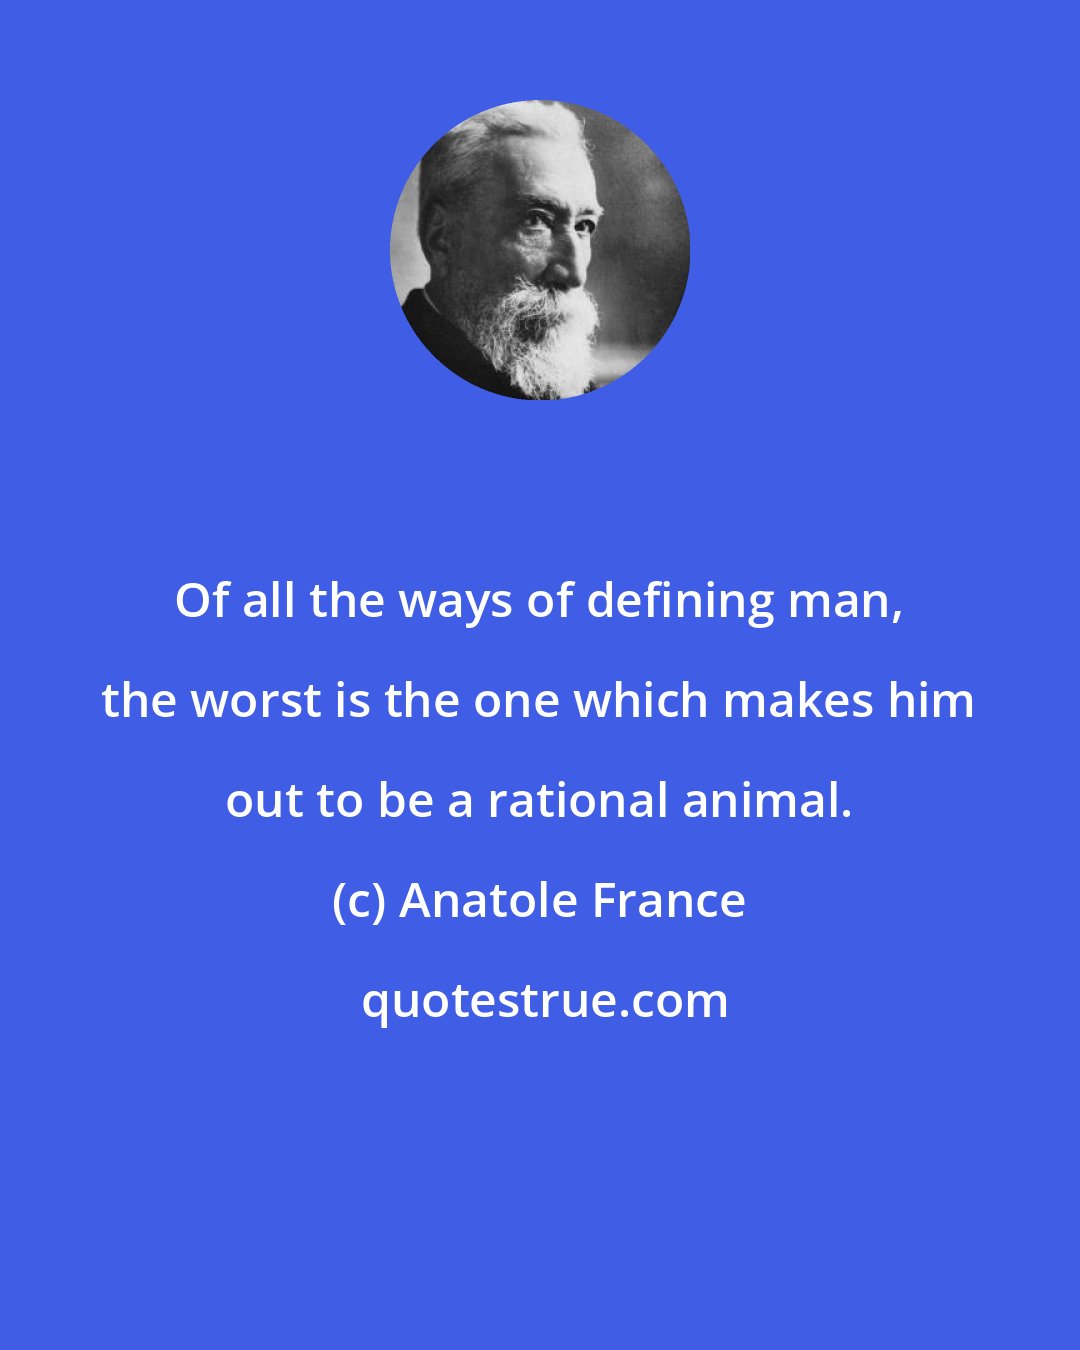 Anatole France: Of all the ways of defining man, the worst is the one which makes him out to be a rational animal.